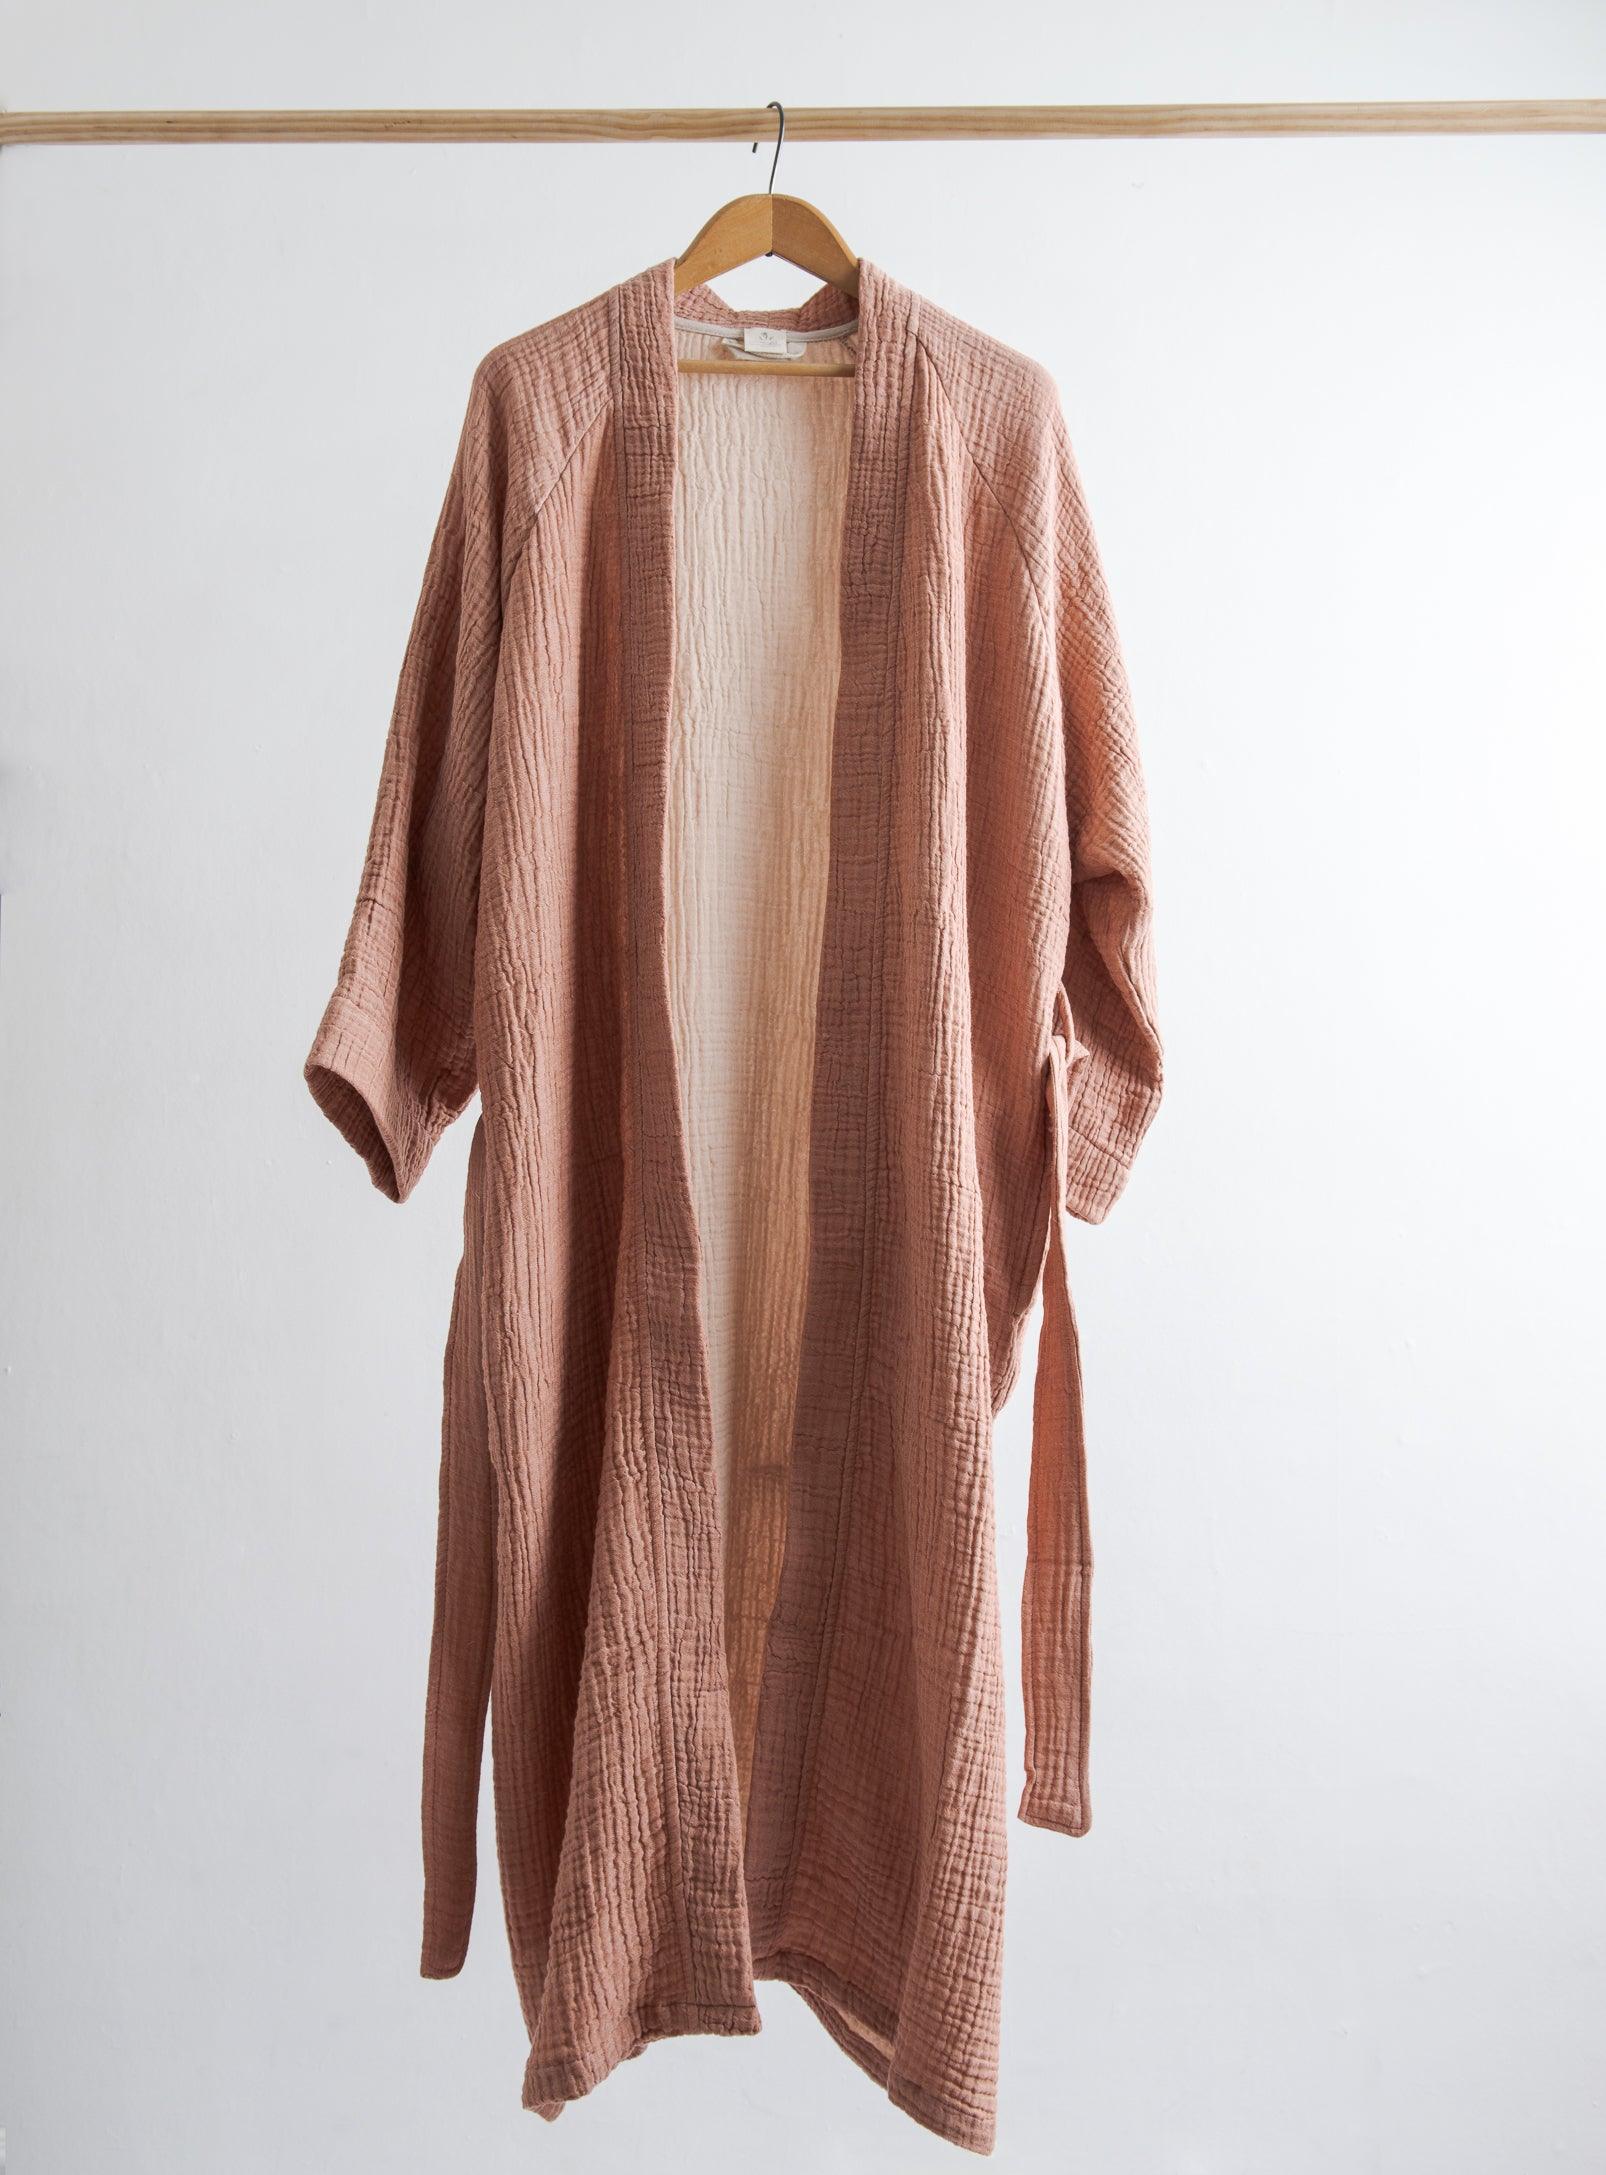 a peachy pink coloured cotton robe hung on a rod